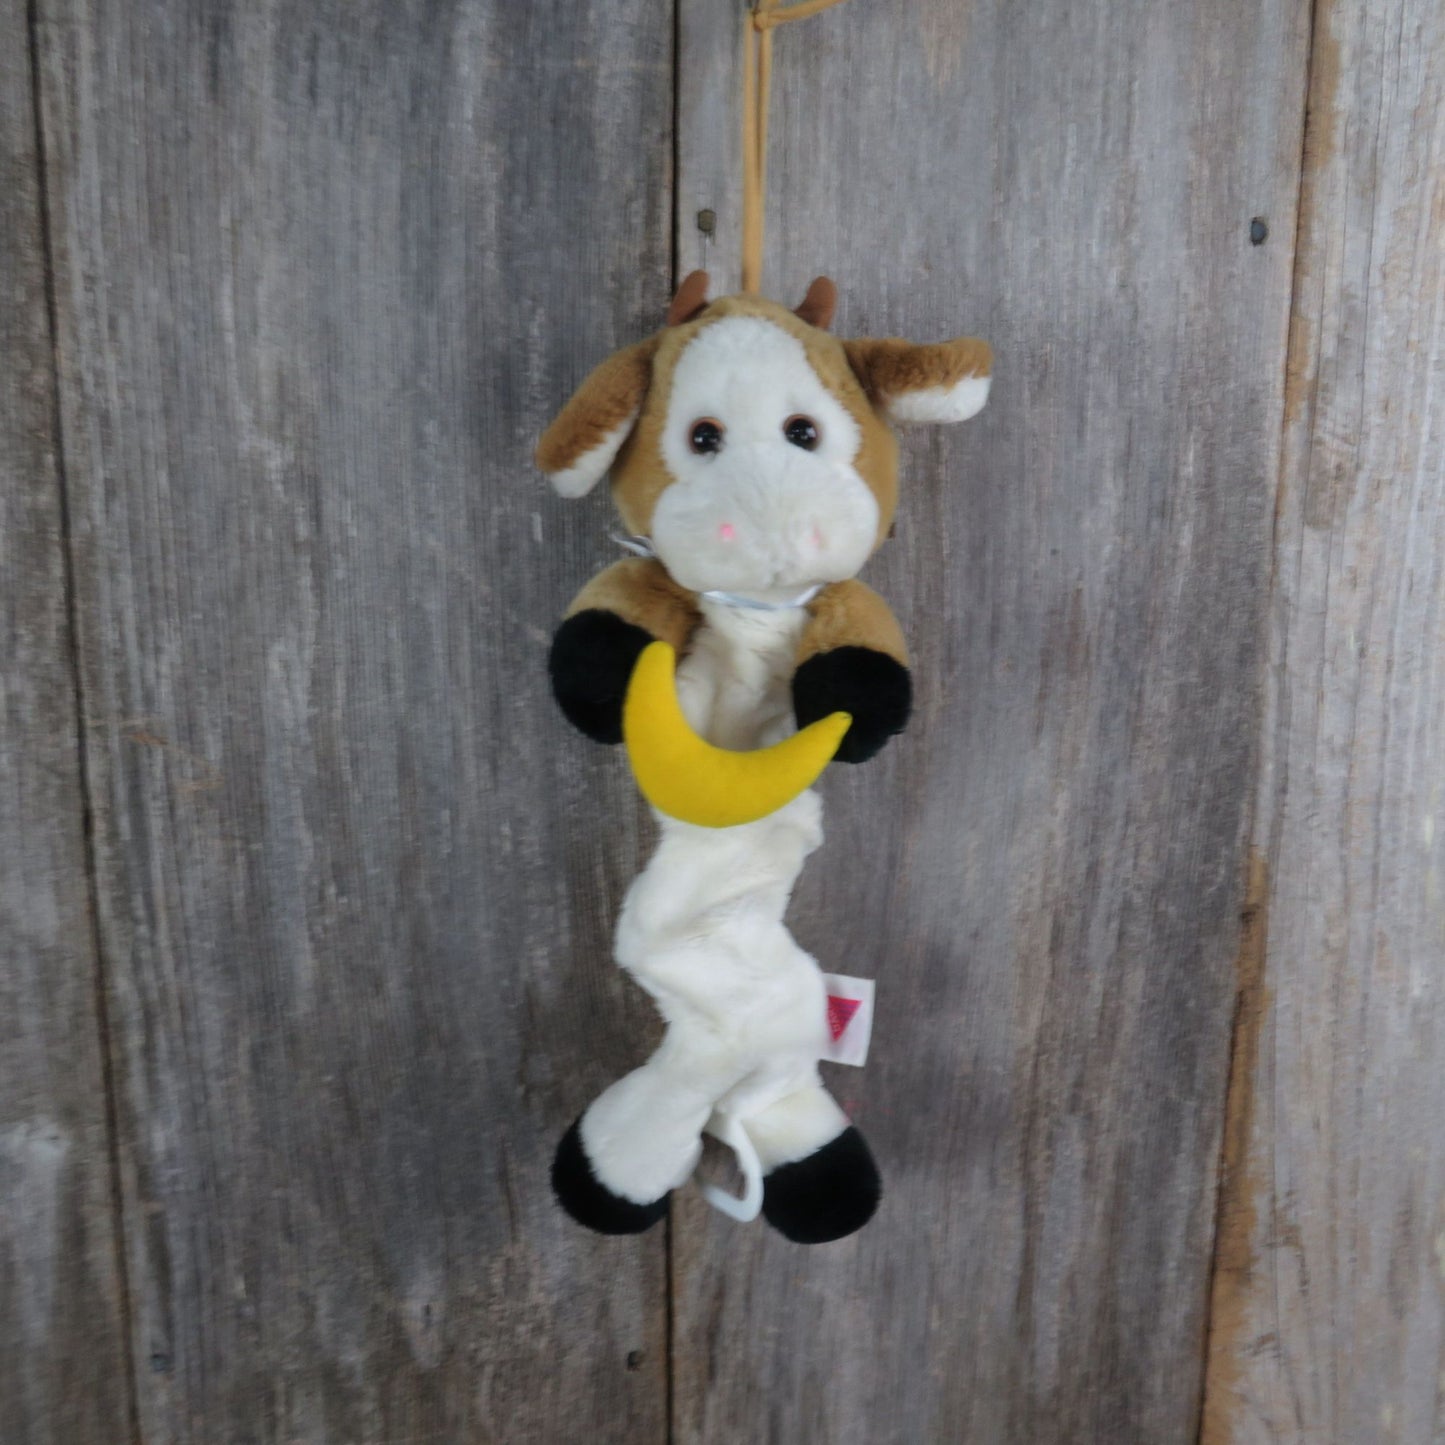 Cow Musical Plush Pull Music Box Dakin Catch a Falling Star Infant Pull Vintage Lullaby Toy 1988